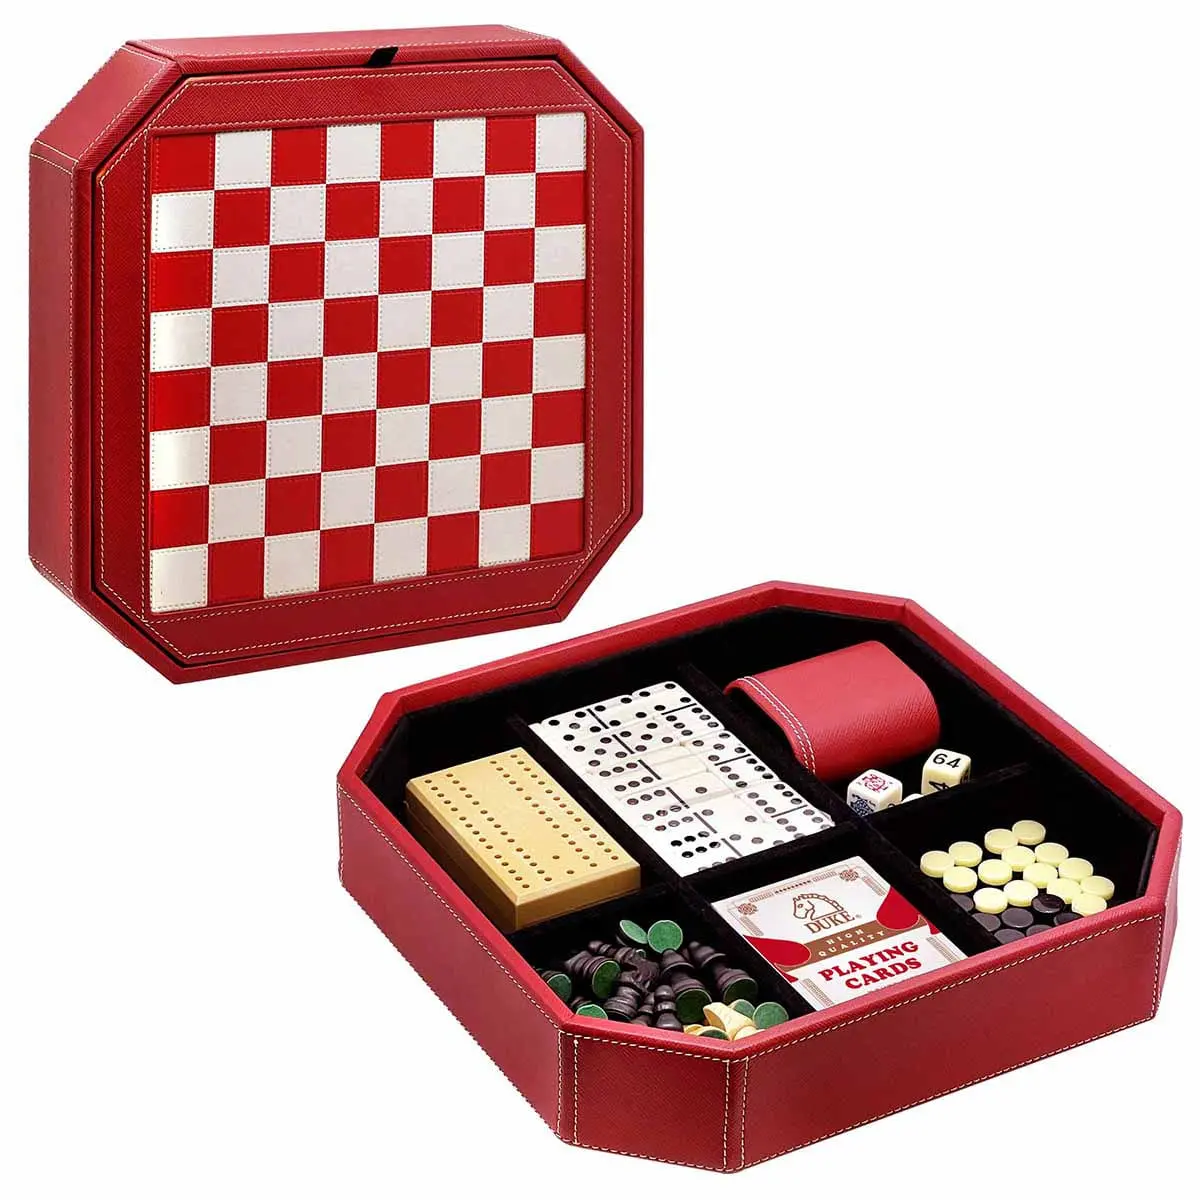 7 in 1 Octangle Shape Chess Multi Board Games Collection with Storage